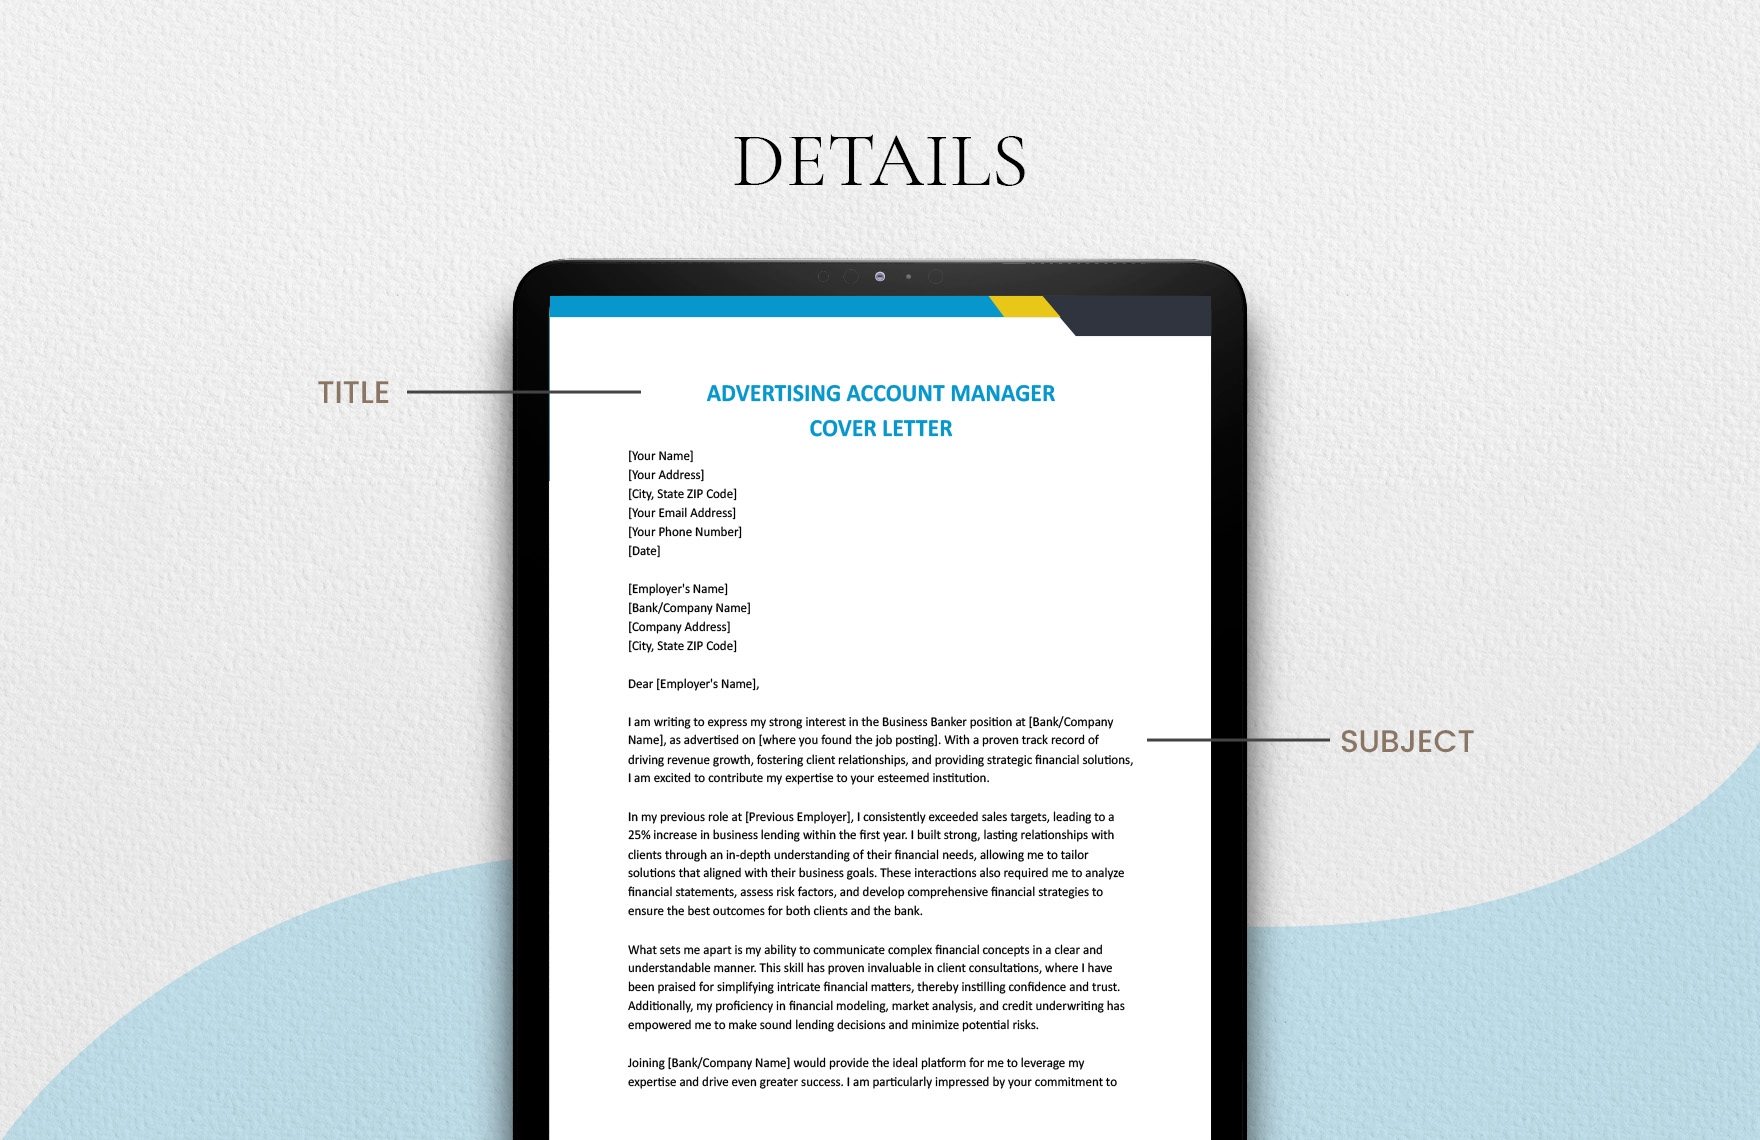 Advertising Account Manager Cover Letter